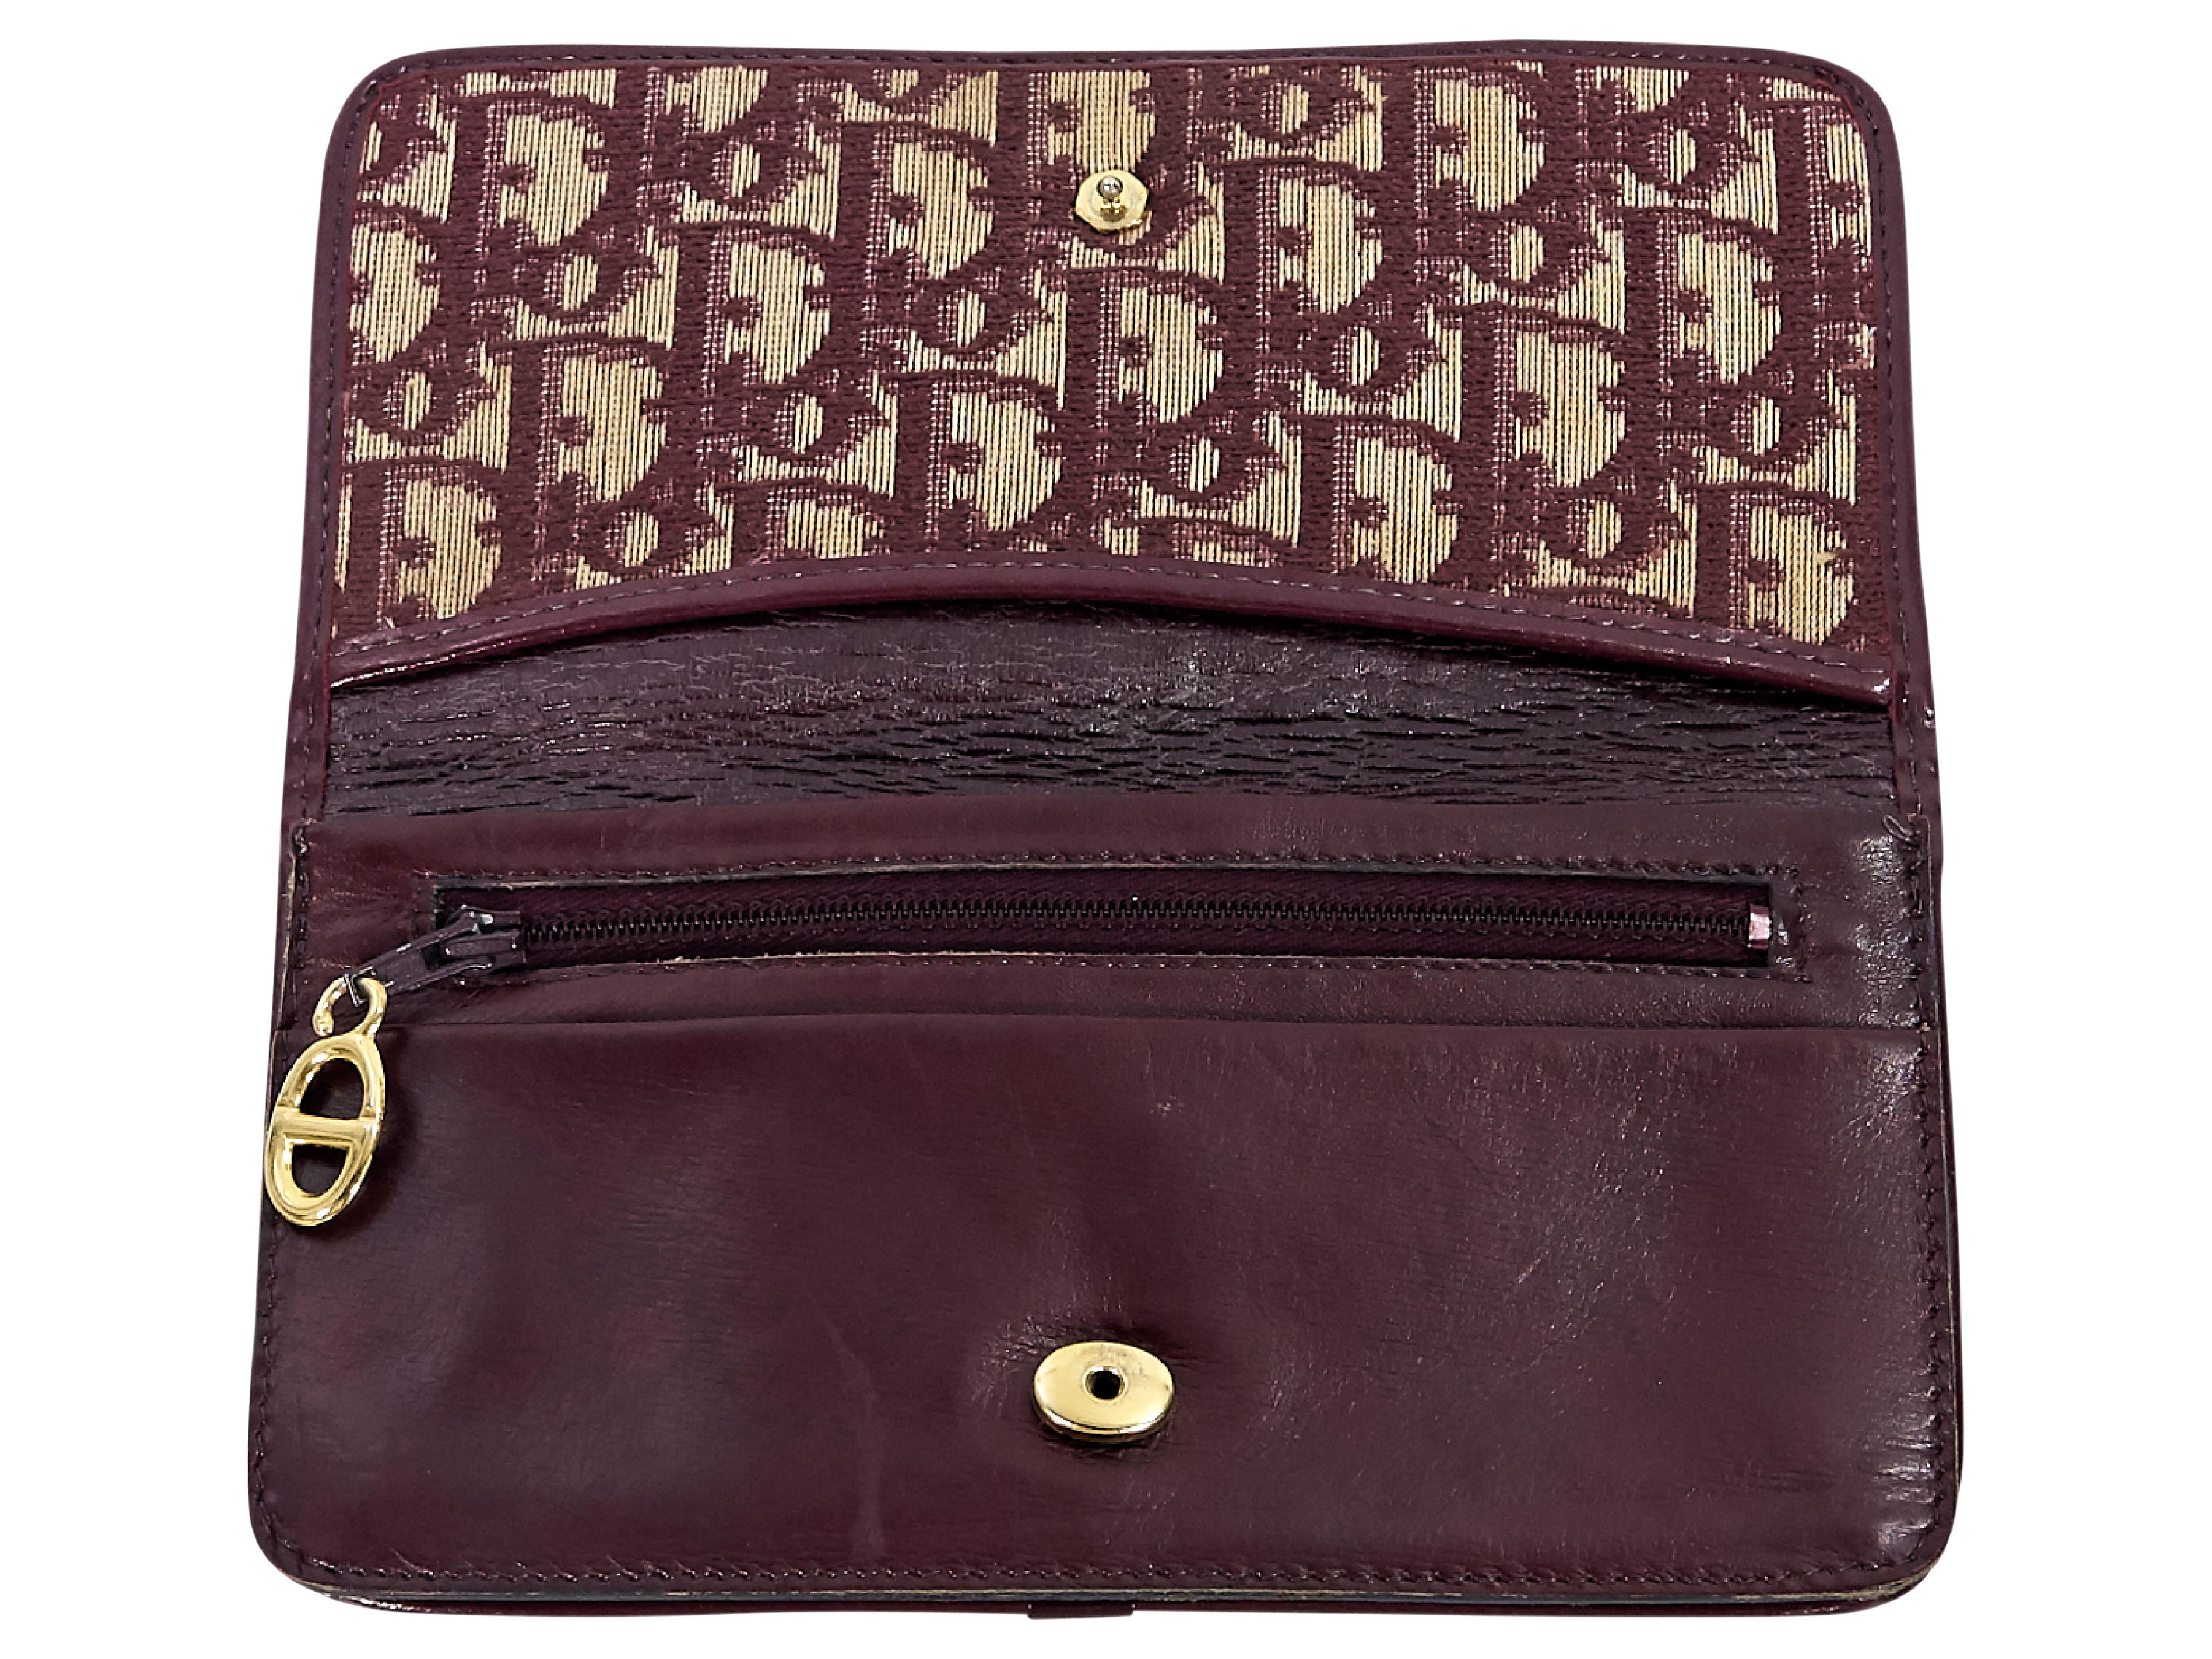 Product details:  Vintage burgundy monogram wallet by Christian Dior.  Front flap with concealed snap closure.  Lined interior with inner zip pocket.  Goldtone hardware.  7.25